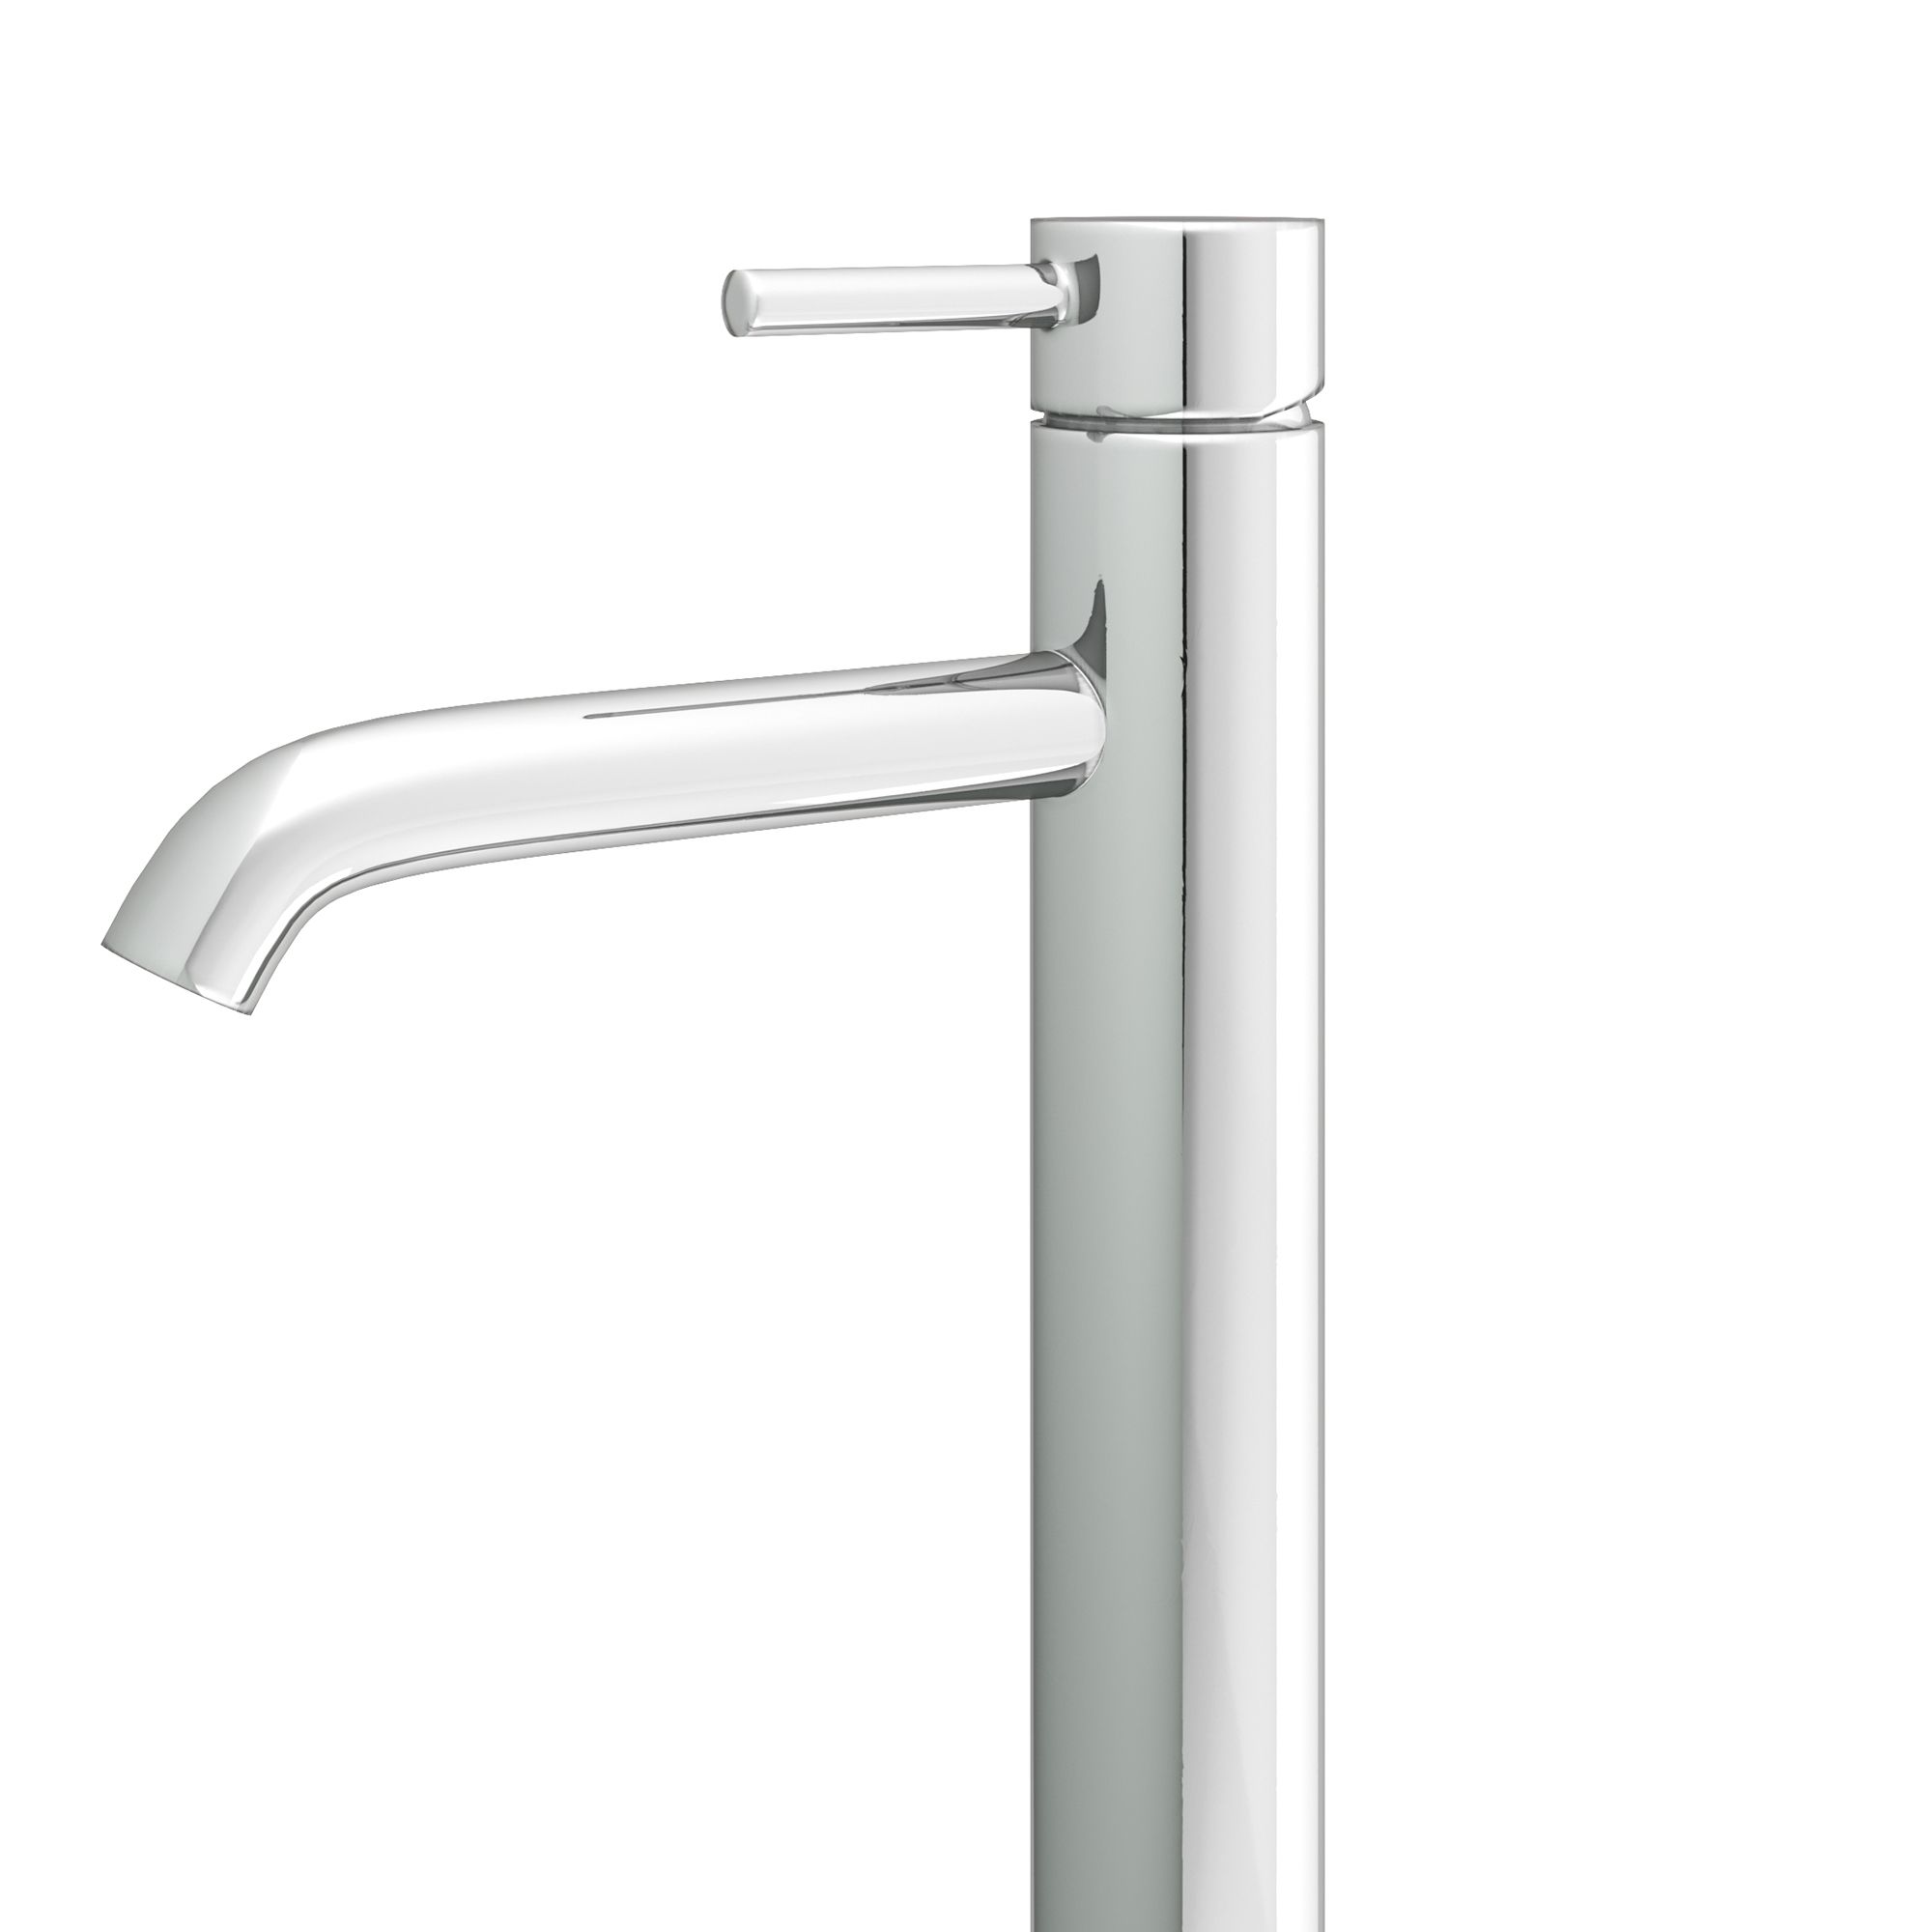 Aquadry Oria Tall Gloss Chrome effect Deck-mounted Thermostatic Sink Mono mixer Tap